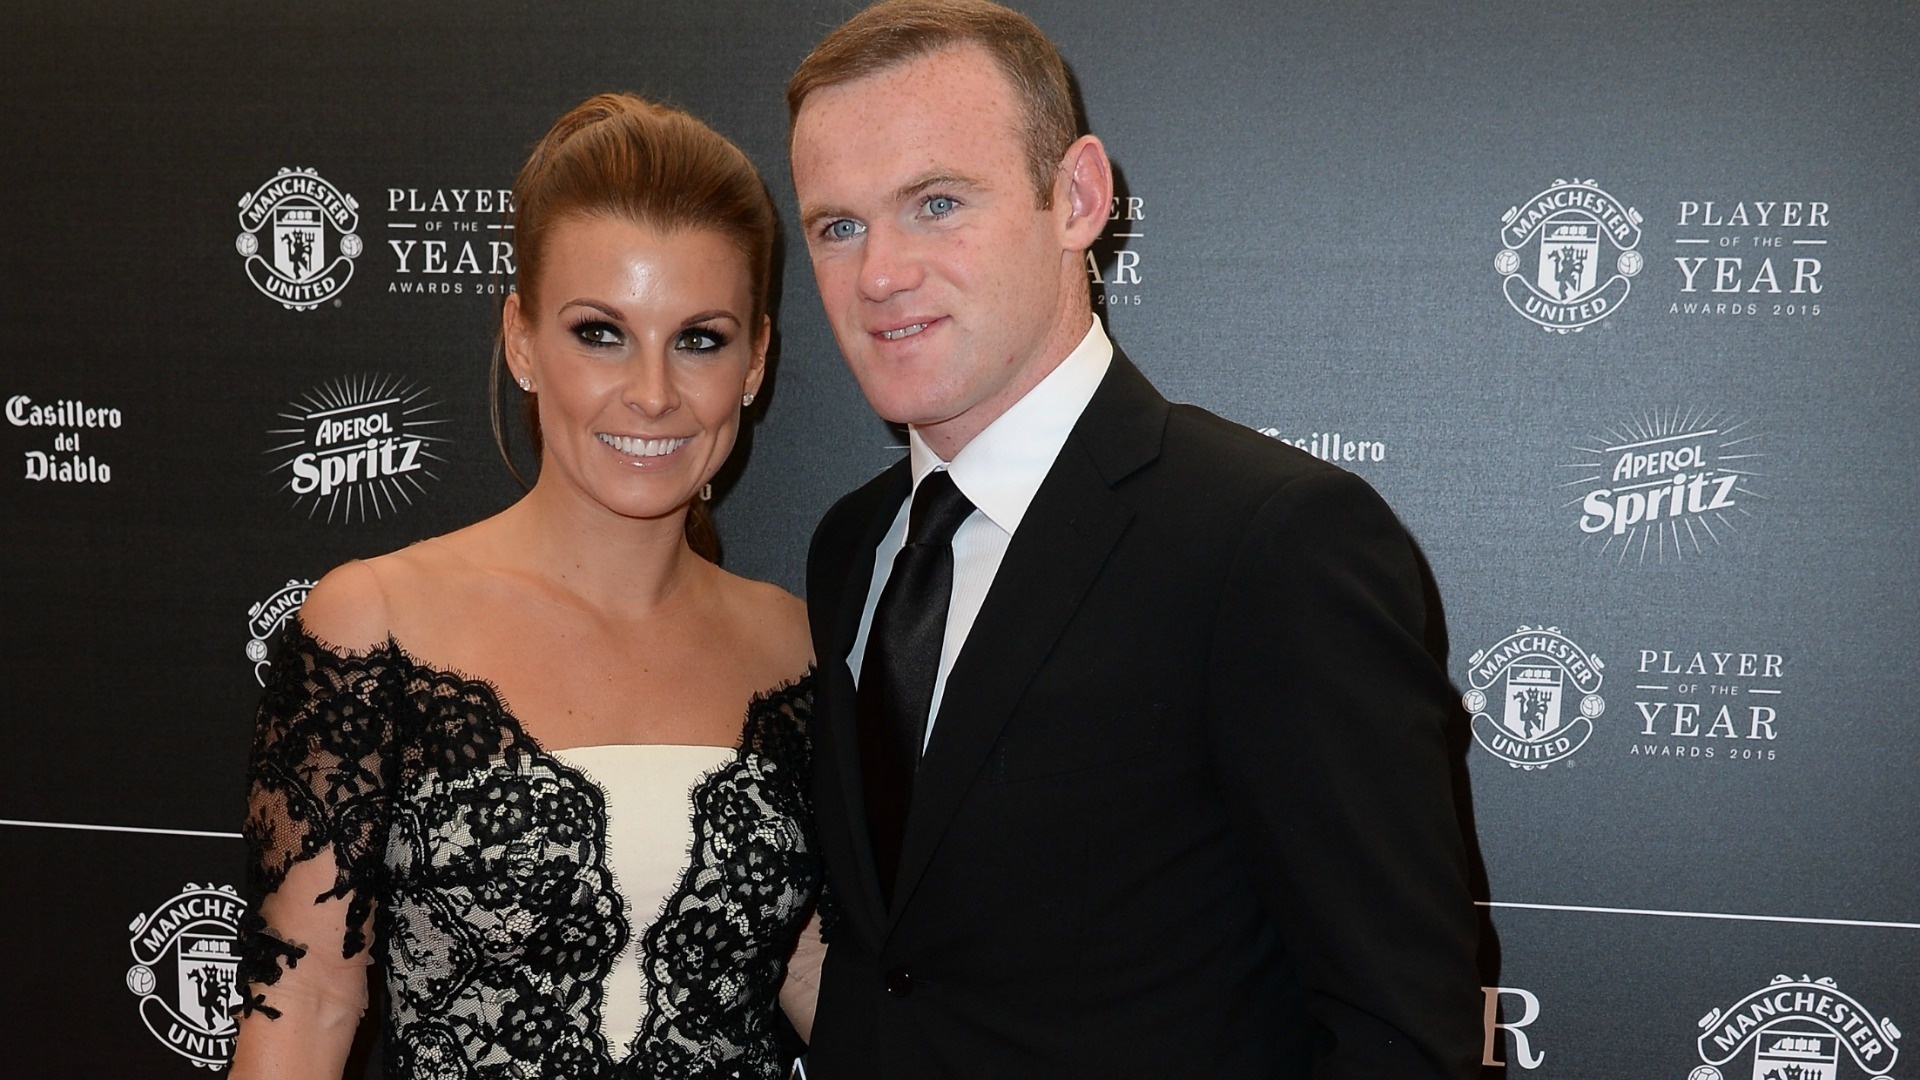 Coleen Rooney, Post-birth diet, Celebrity news, Controversial choices, 1920x1080 Full HD Desktop